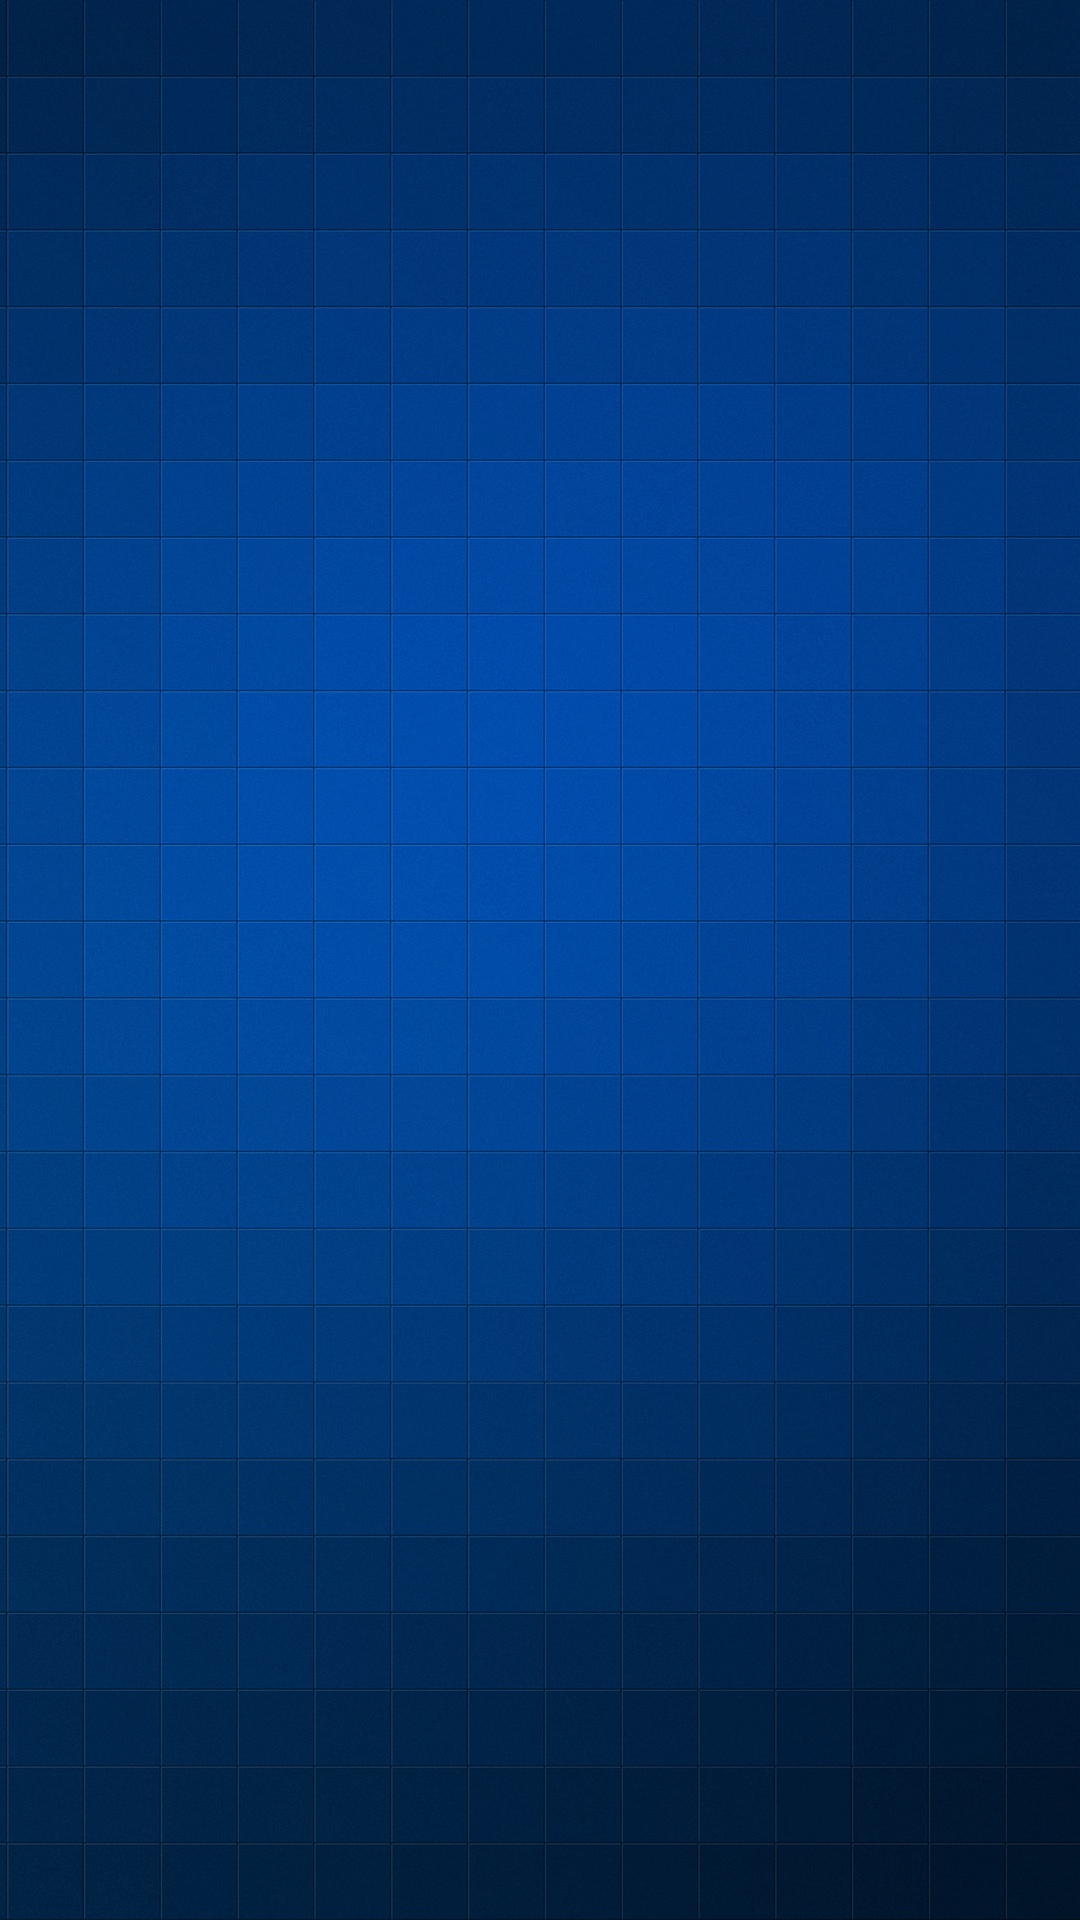 Galaxy S4 Wallpaper With Blue Square Pattern And Gradient Design